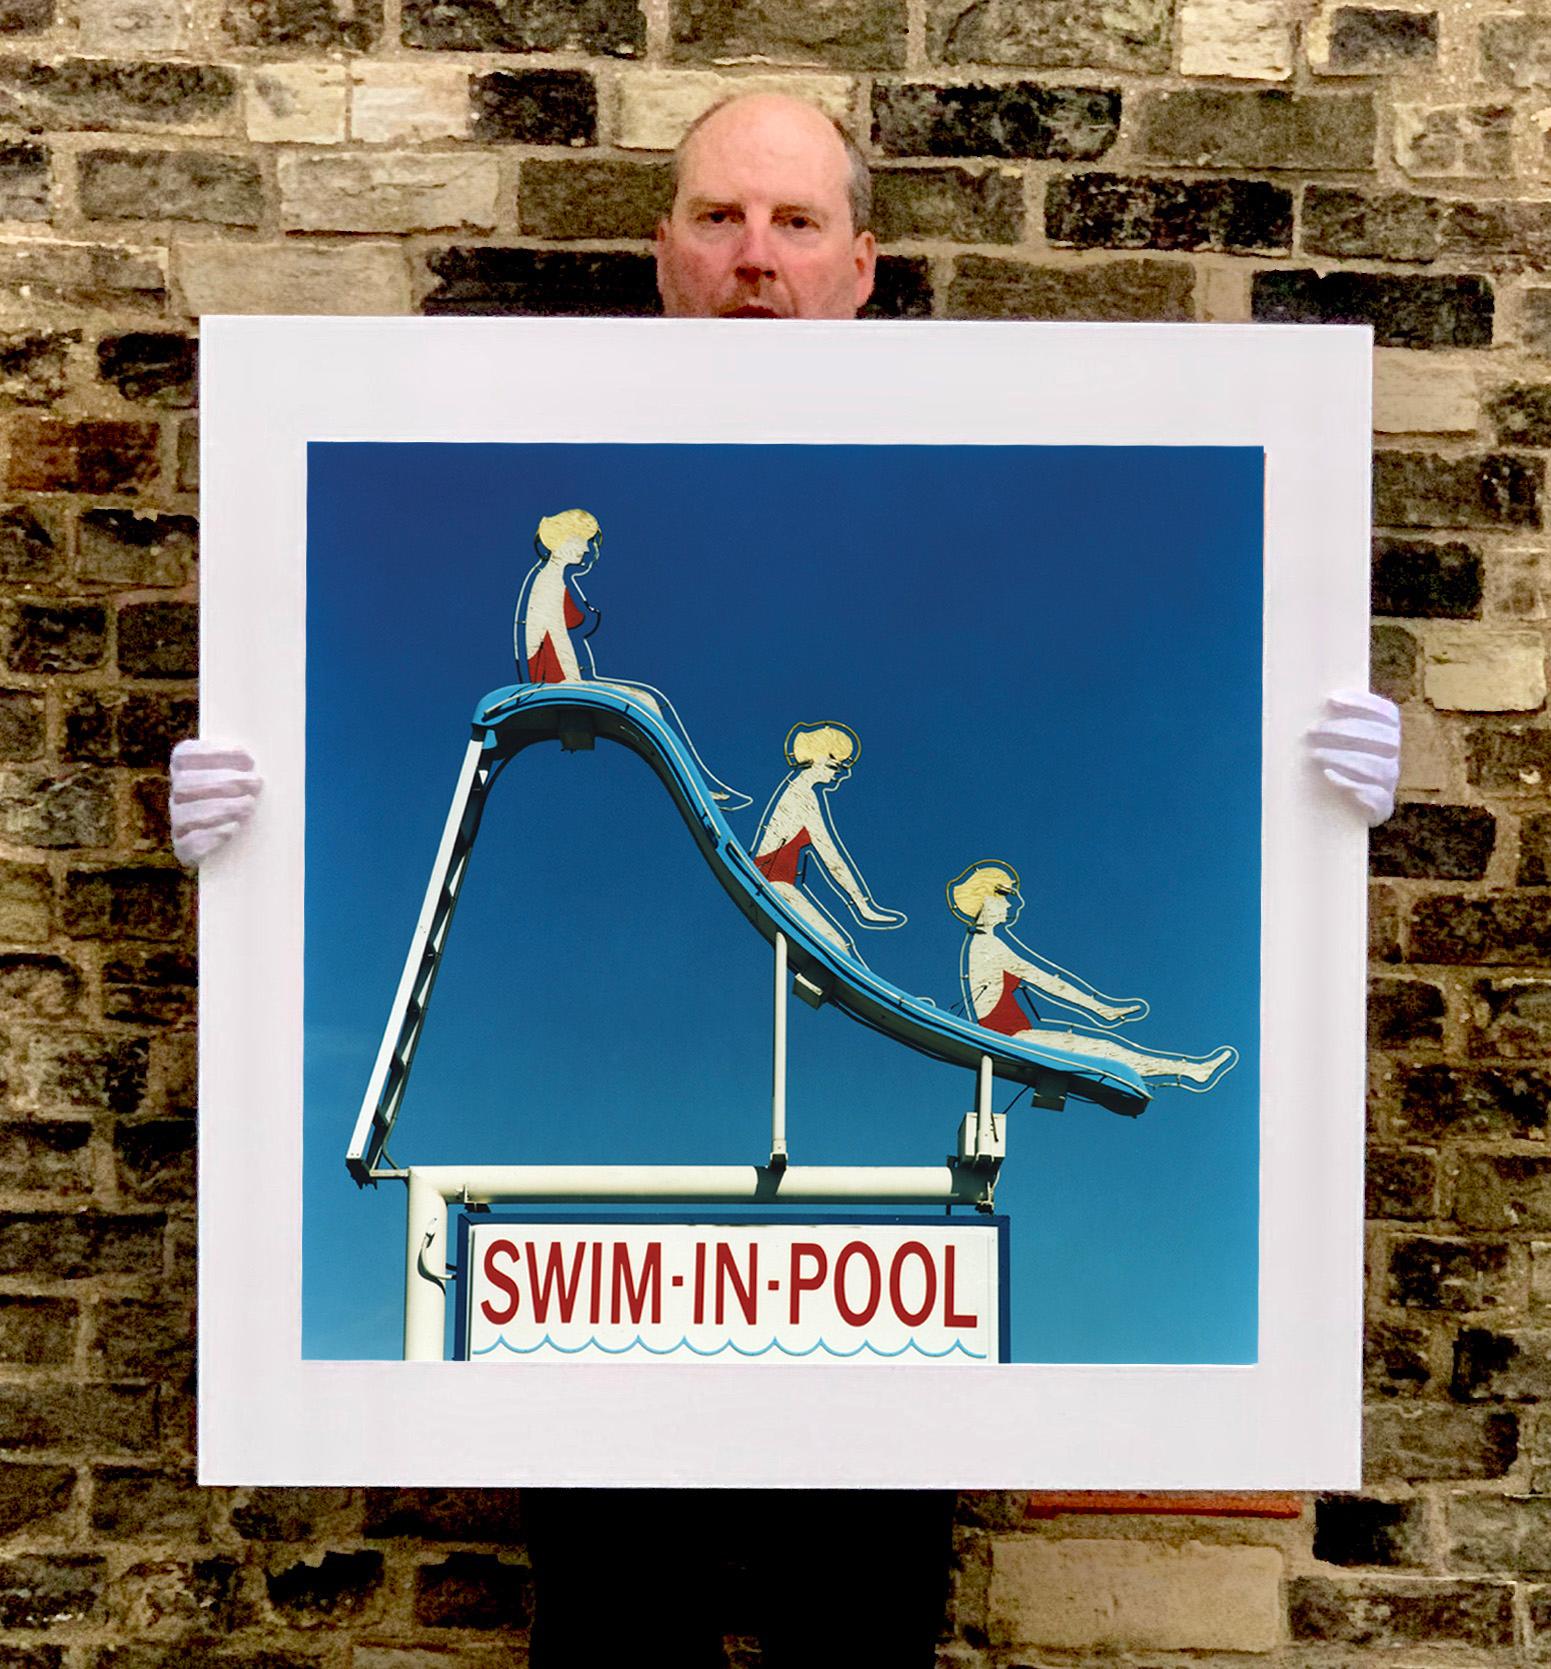 Swim-in-Pool, photograph from Richard Heeps Dream in Colour series. This fun original artwork really shows Richard's unique eye as a photographer, creating this slightly surreal kitsch pop-art picture from an American roadside sign. Shot in Las